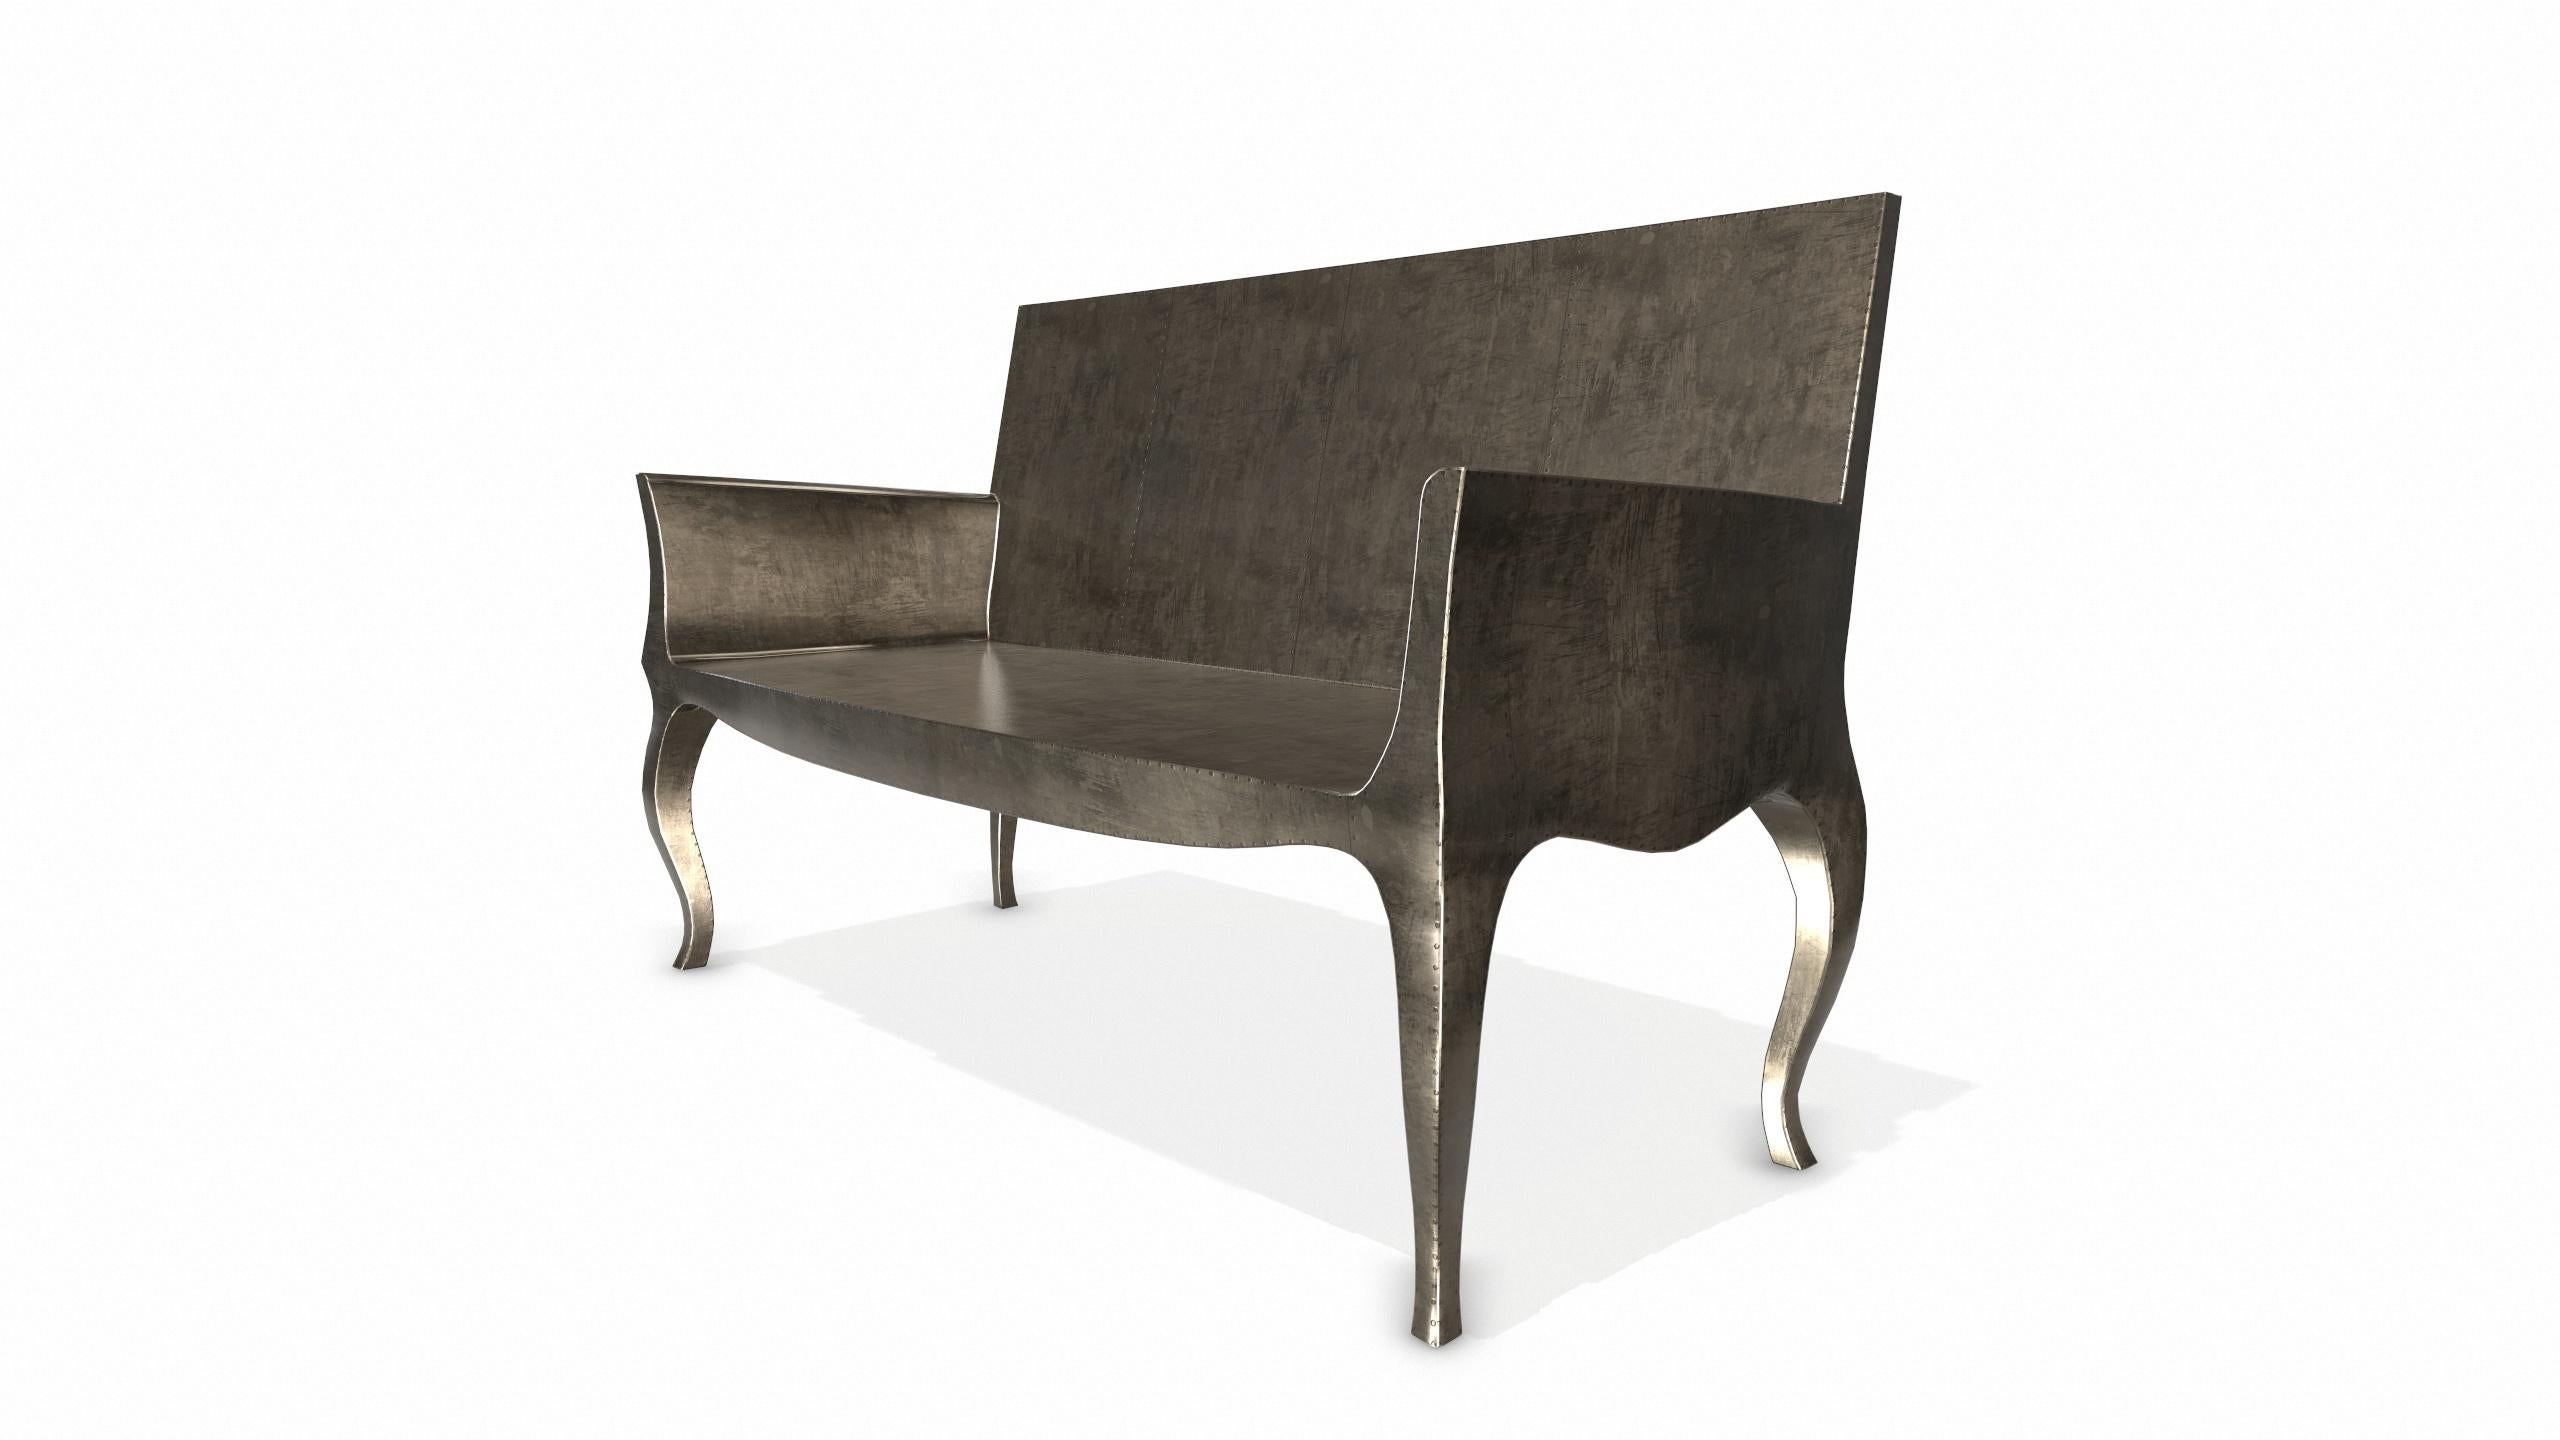 Hand-Crafted Louise Settee Art Deco Daybeds in Smooth Antique Bronze by Paul Mathieu For Sale